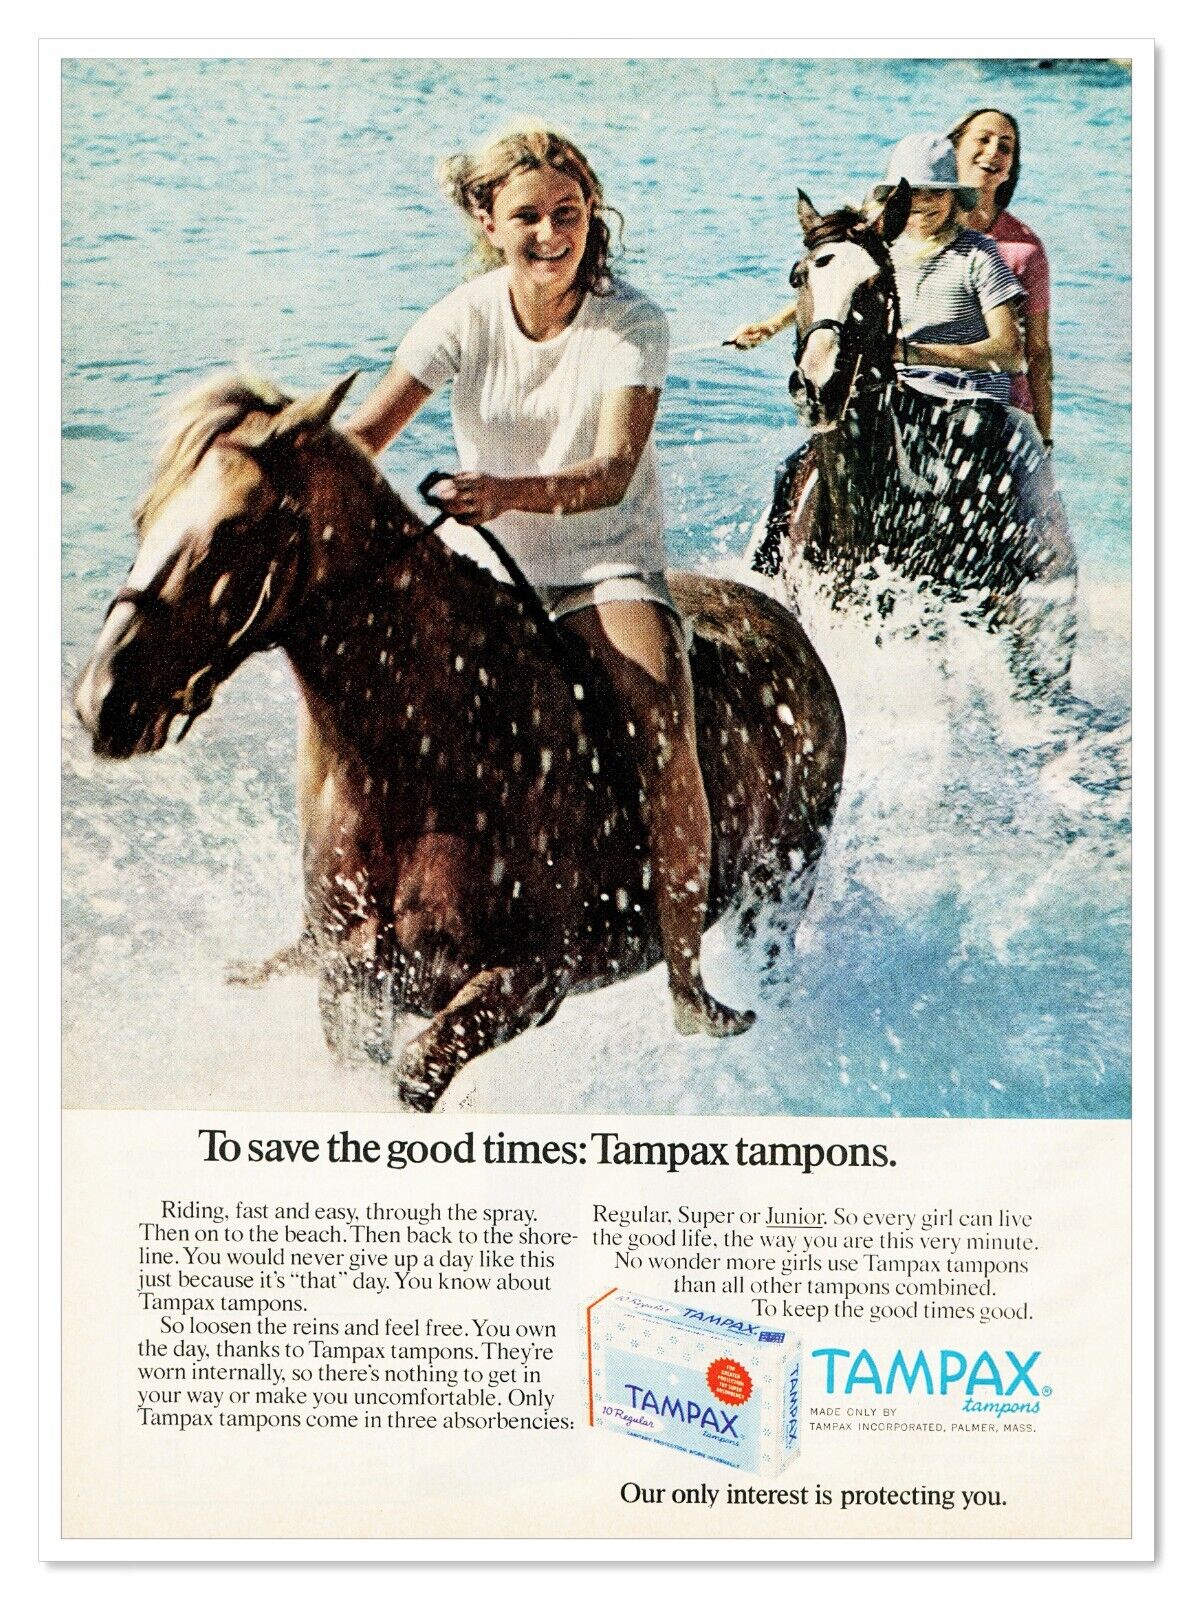 Tampax Tampons Women Riding Horses Vintage 1972 Full-Page Magazine Ad